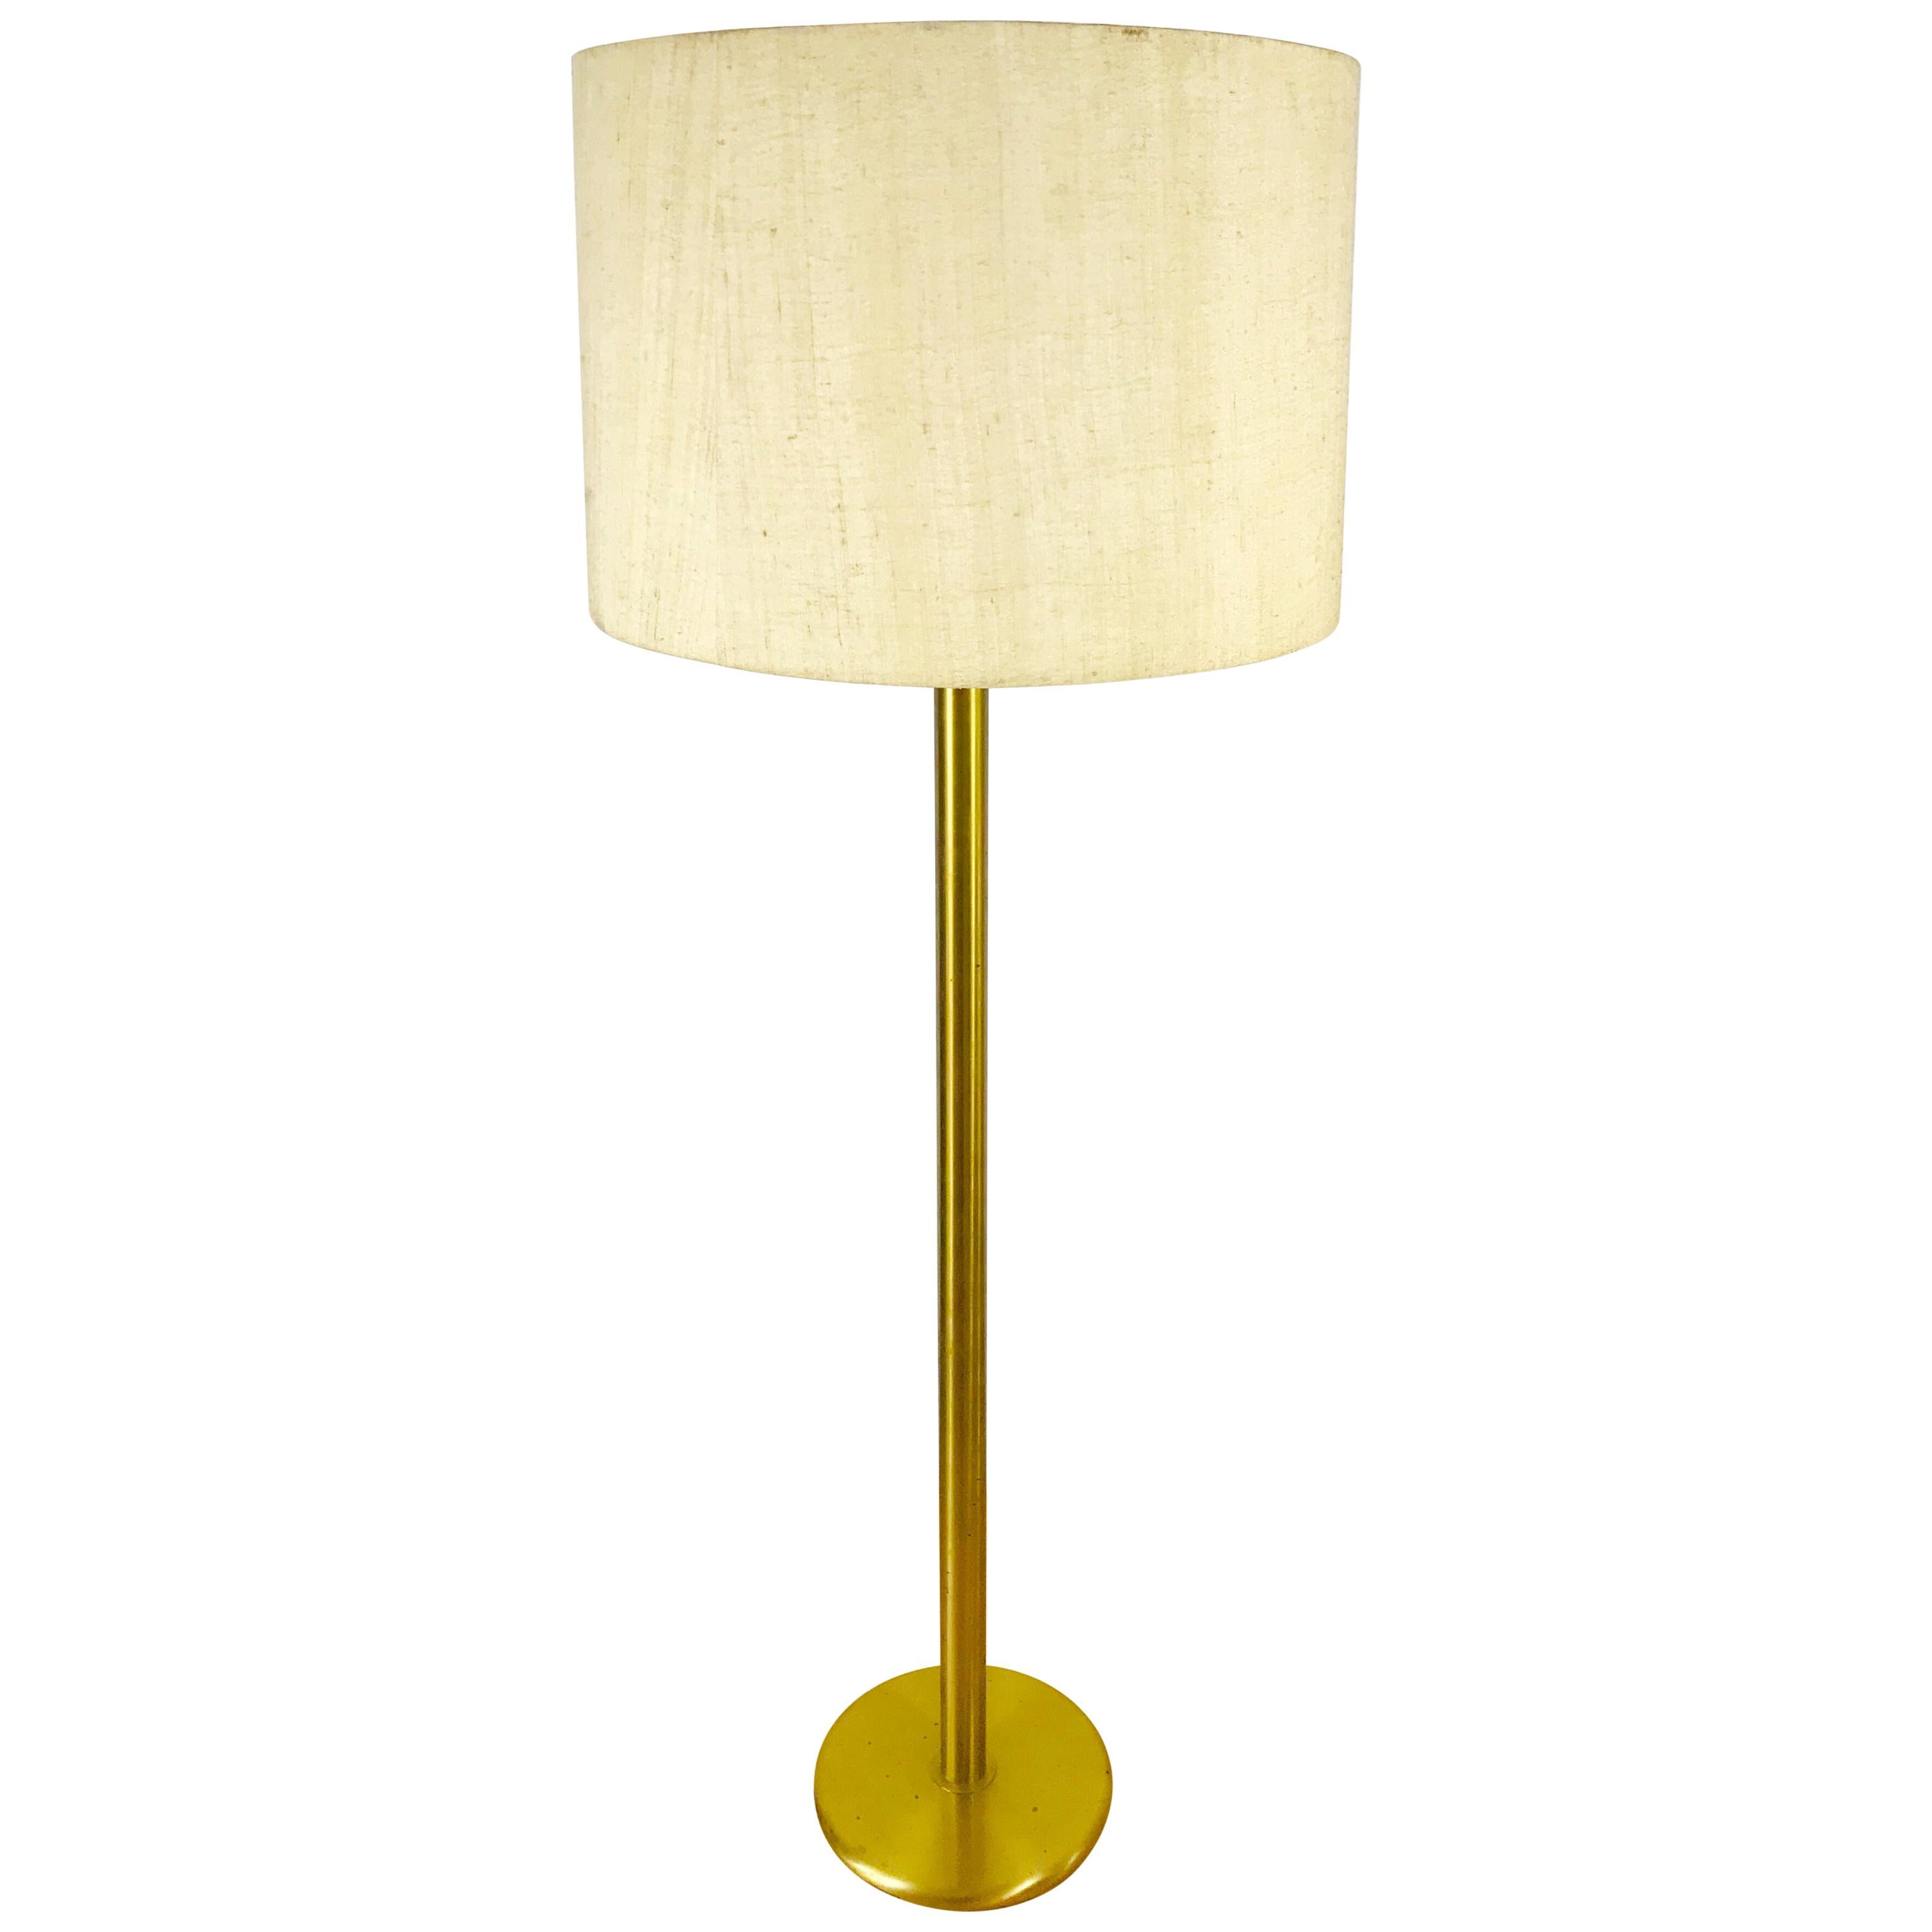 Cosack Midcentury Brass and Cloth Floor Lamp, 1960s, Germany